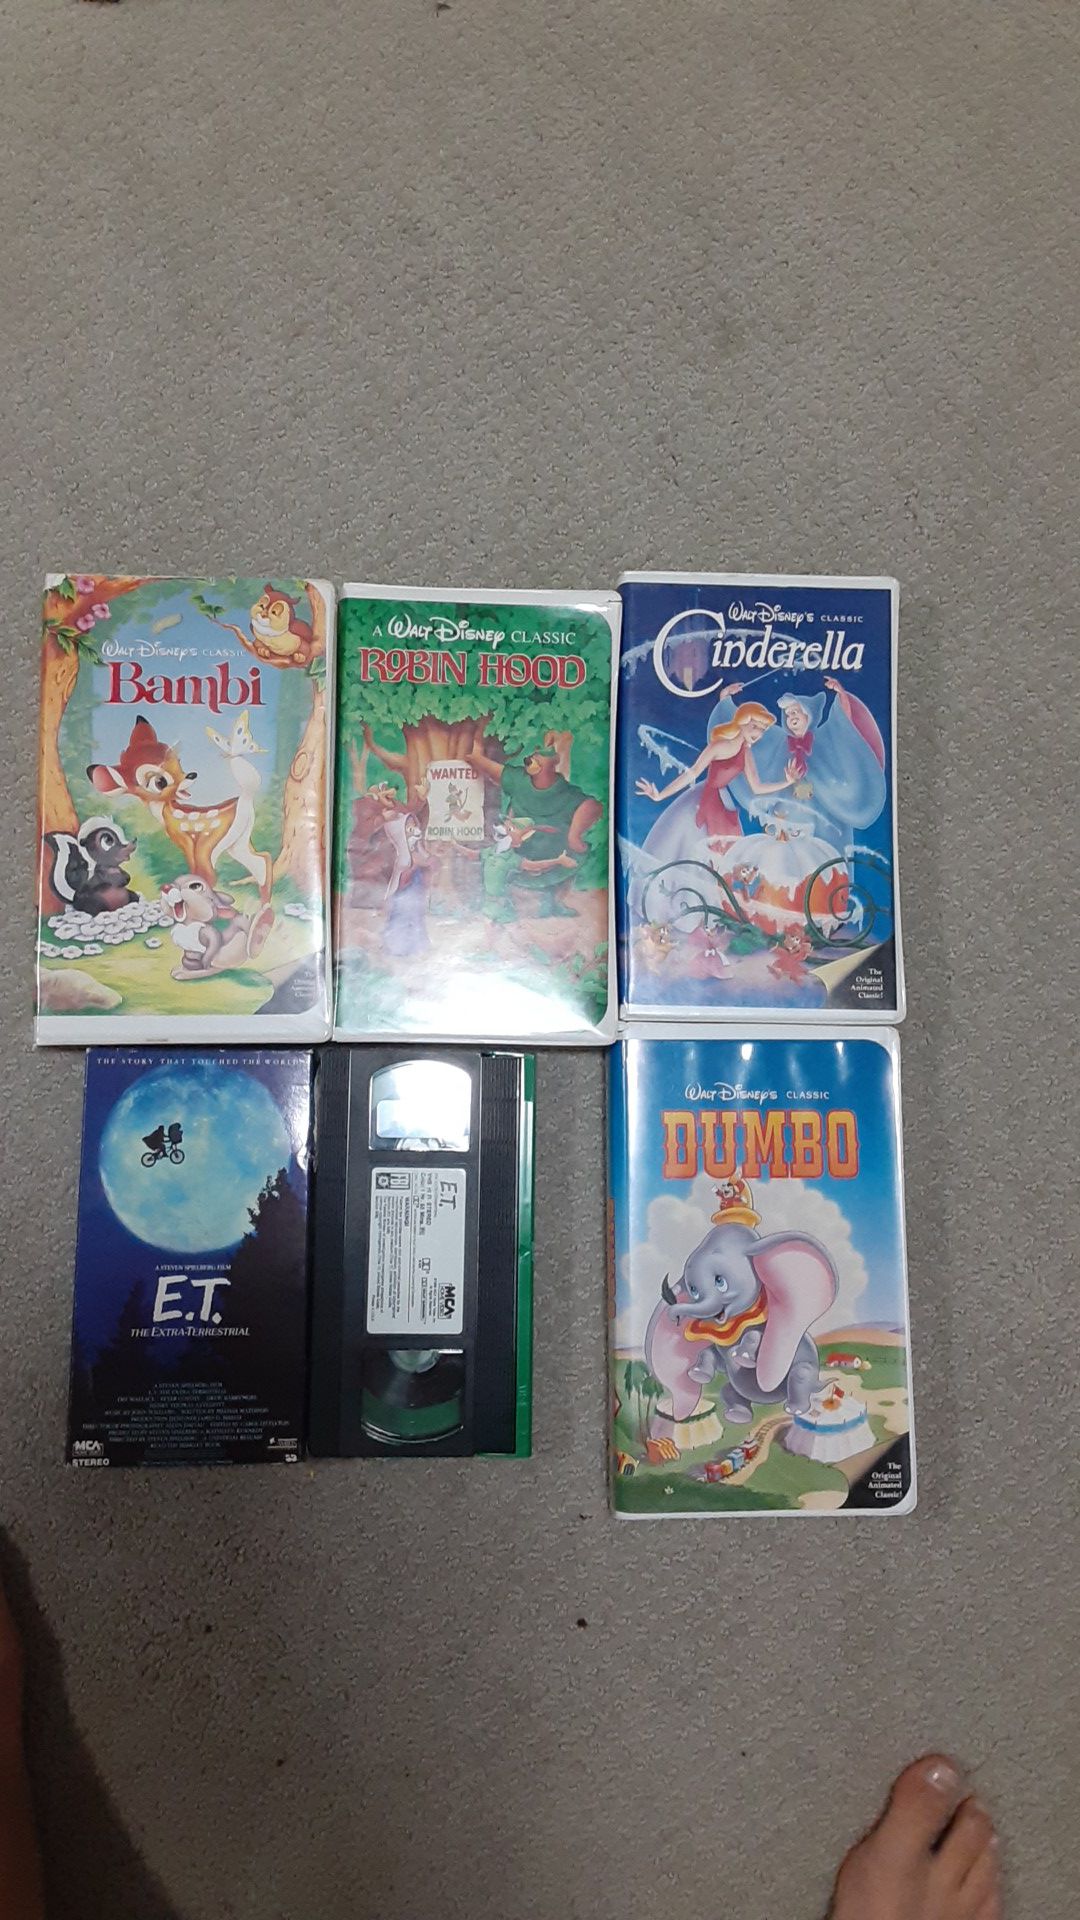 Rare VHS tapes